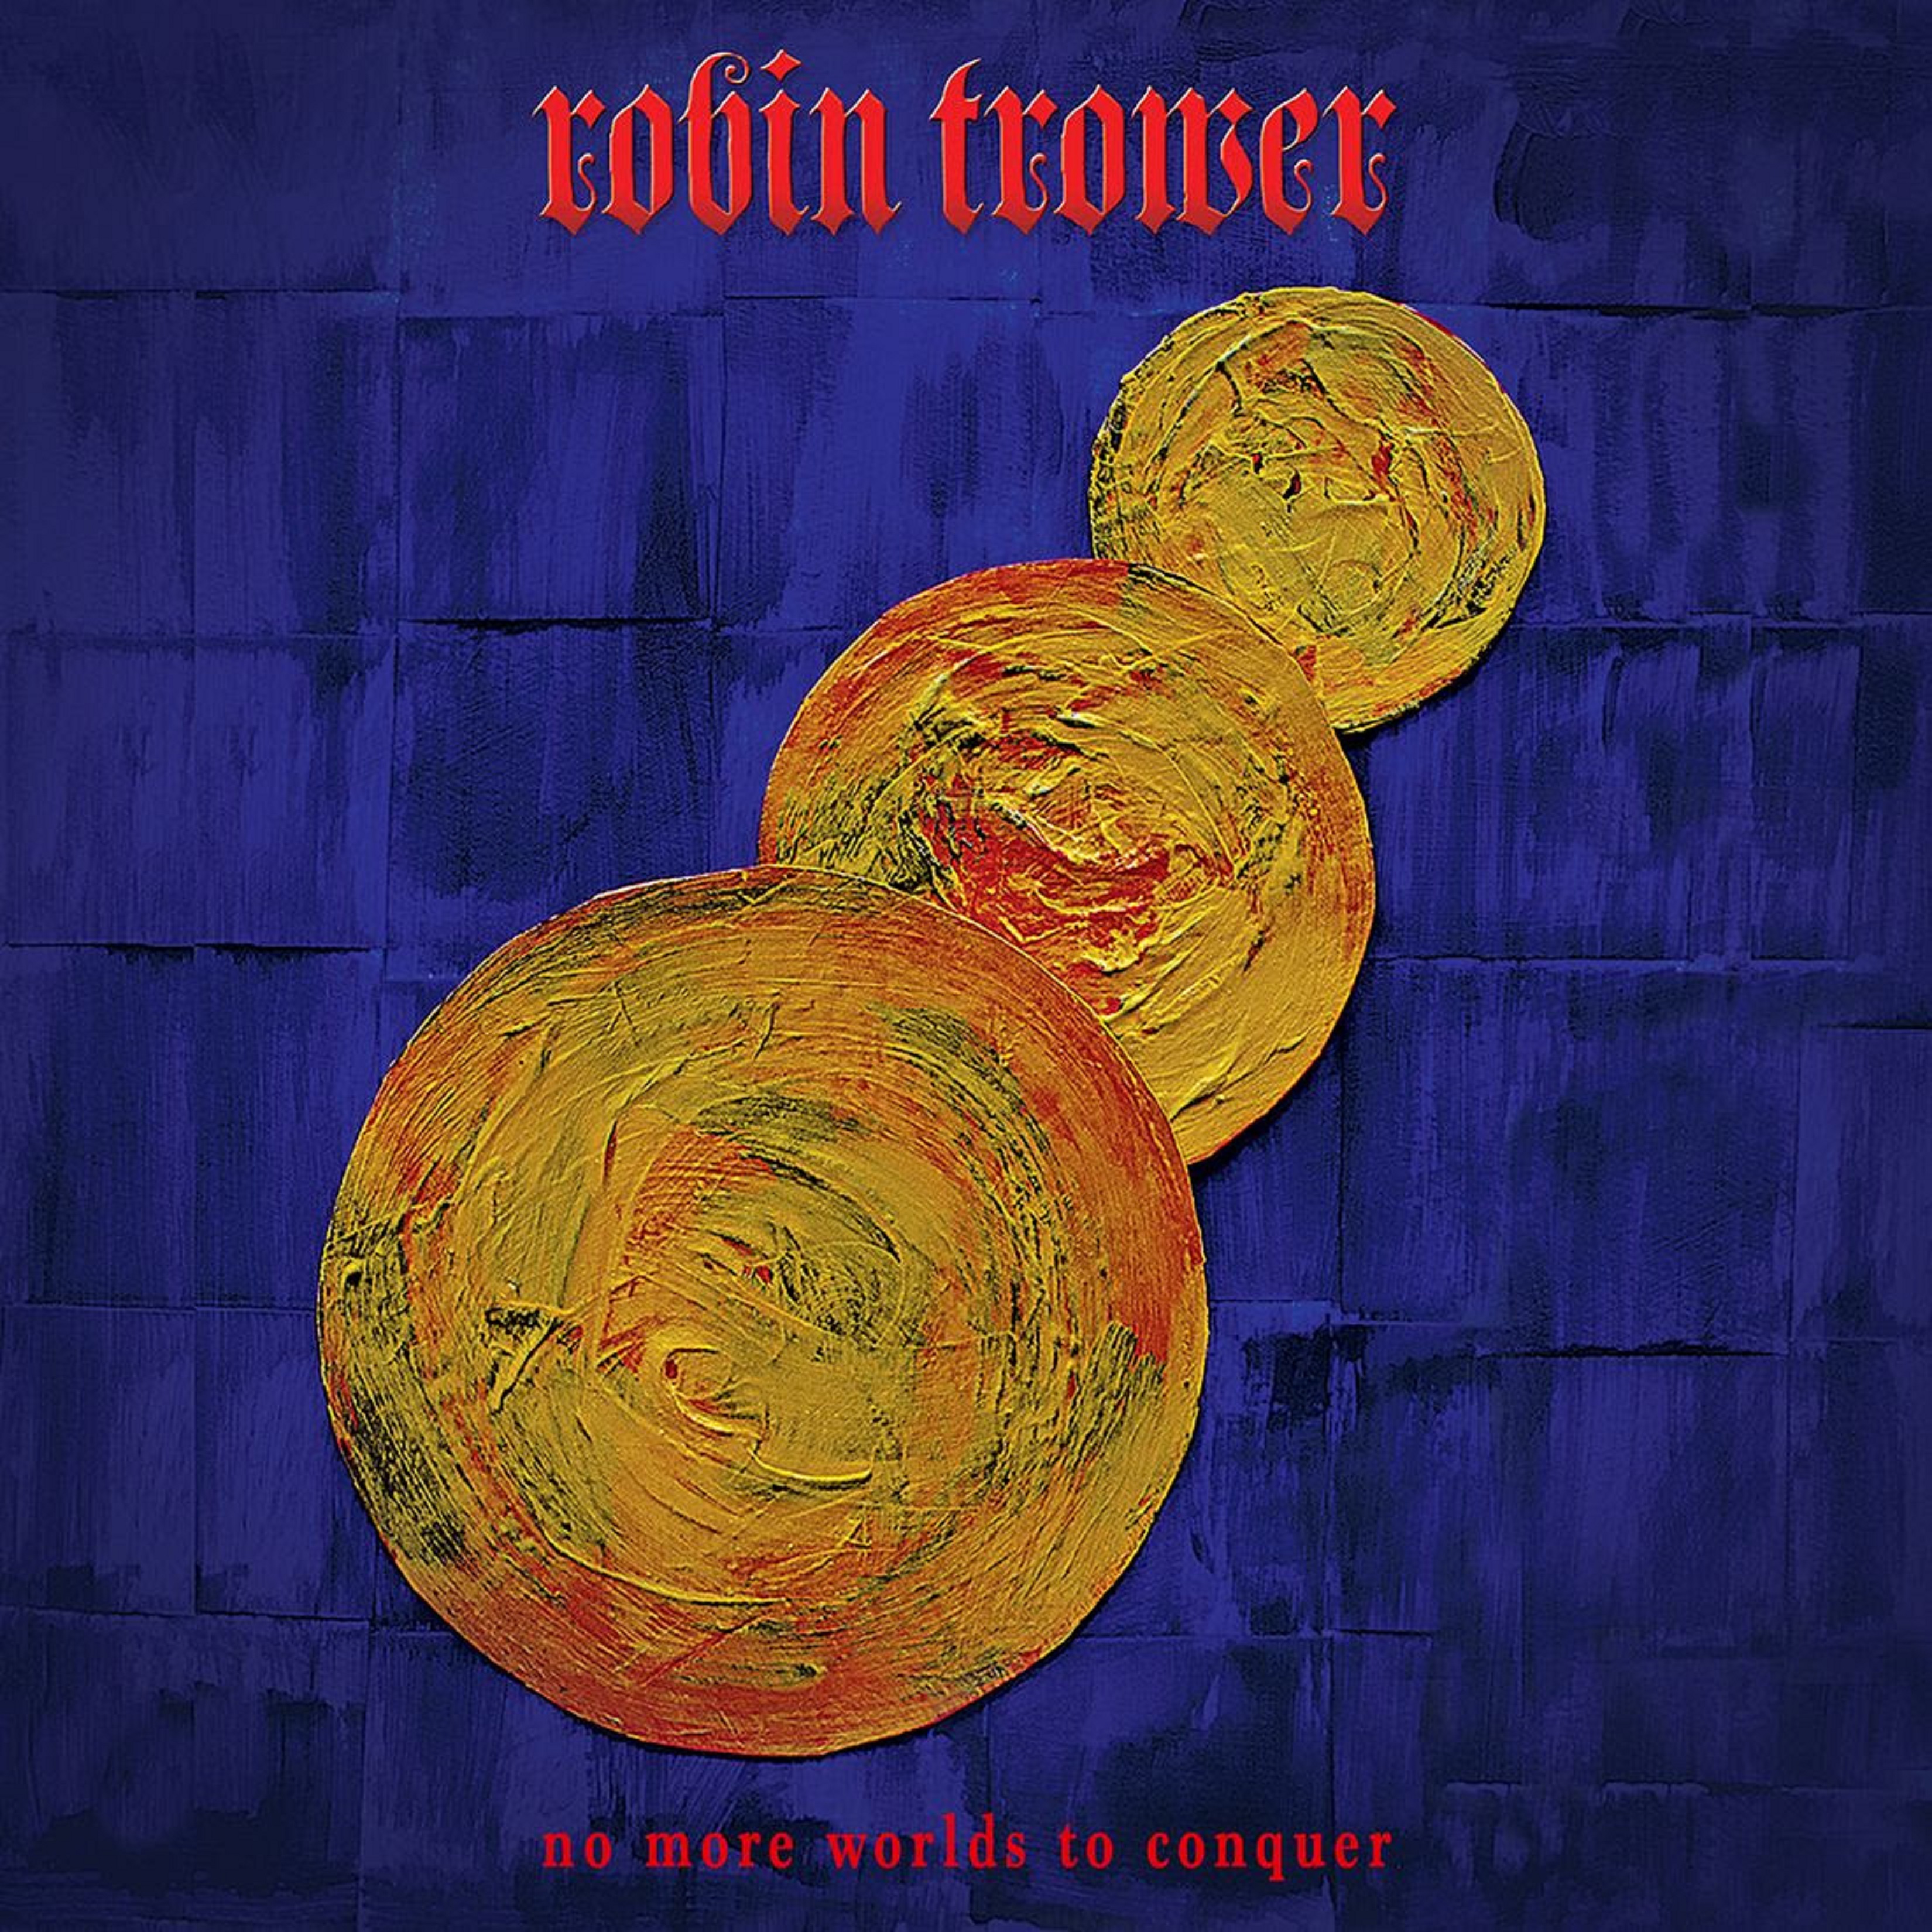 Robin Trower Releases “The Razor’s Edge,” Second Single From New Album 'No More Worlds To Conquer'